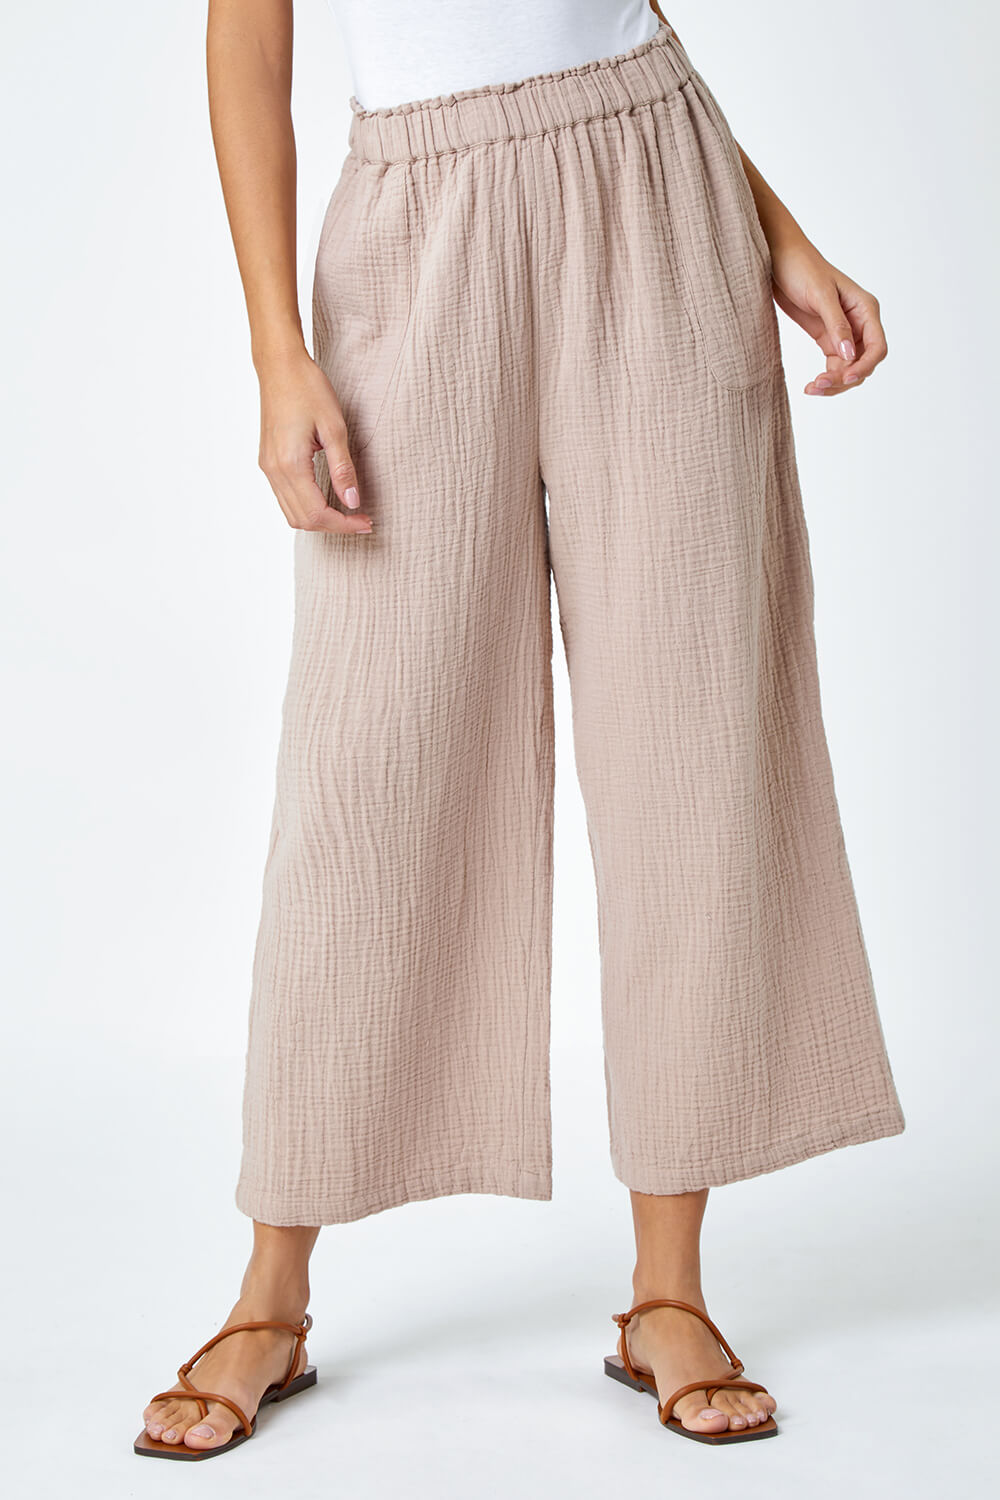 Natural  Textured Cotton Culotte Trousers, Image 4 of 5